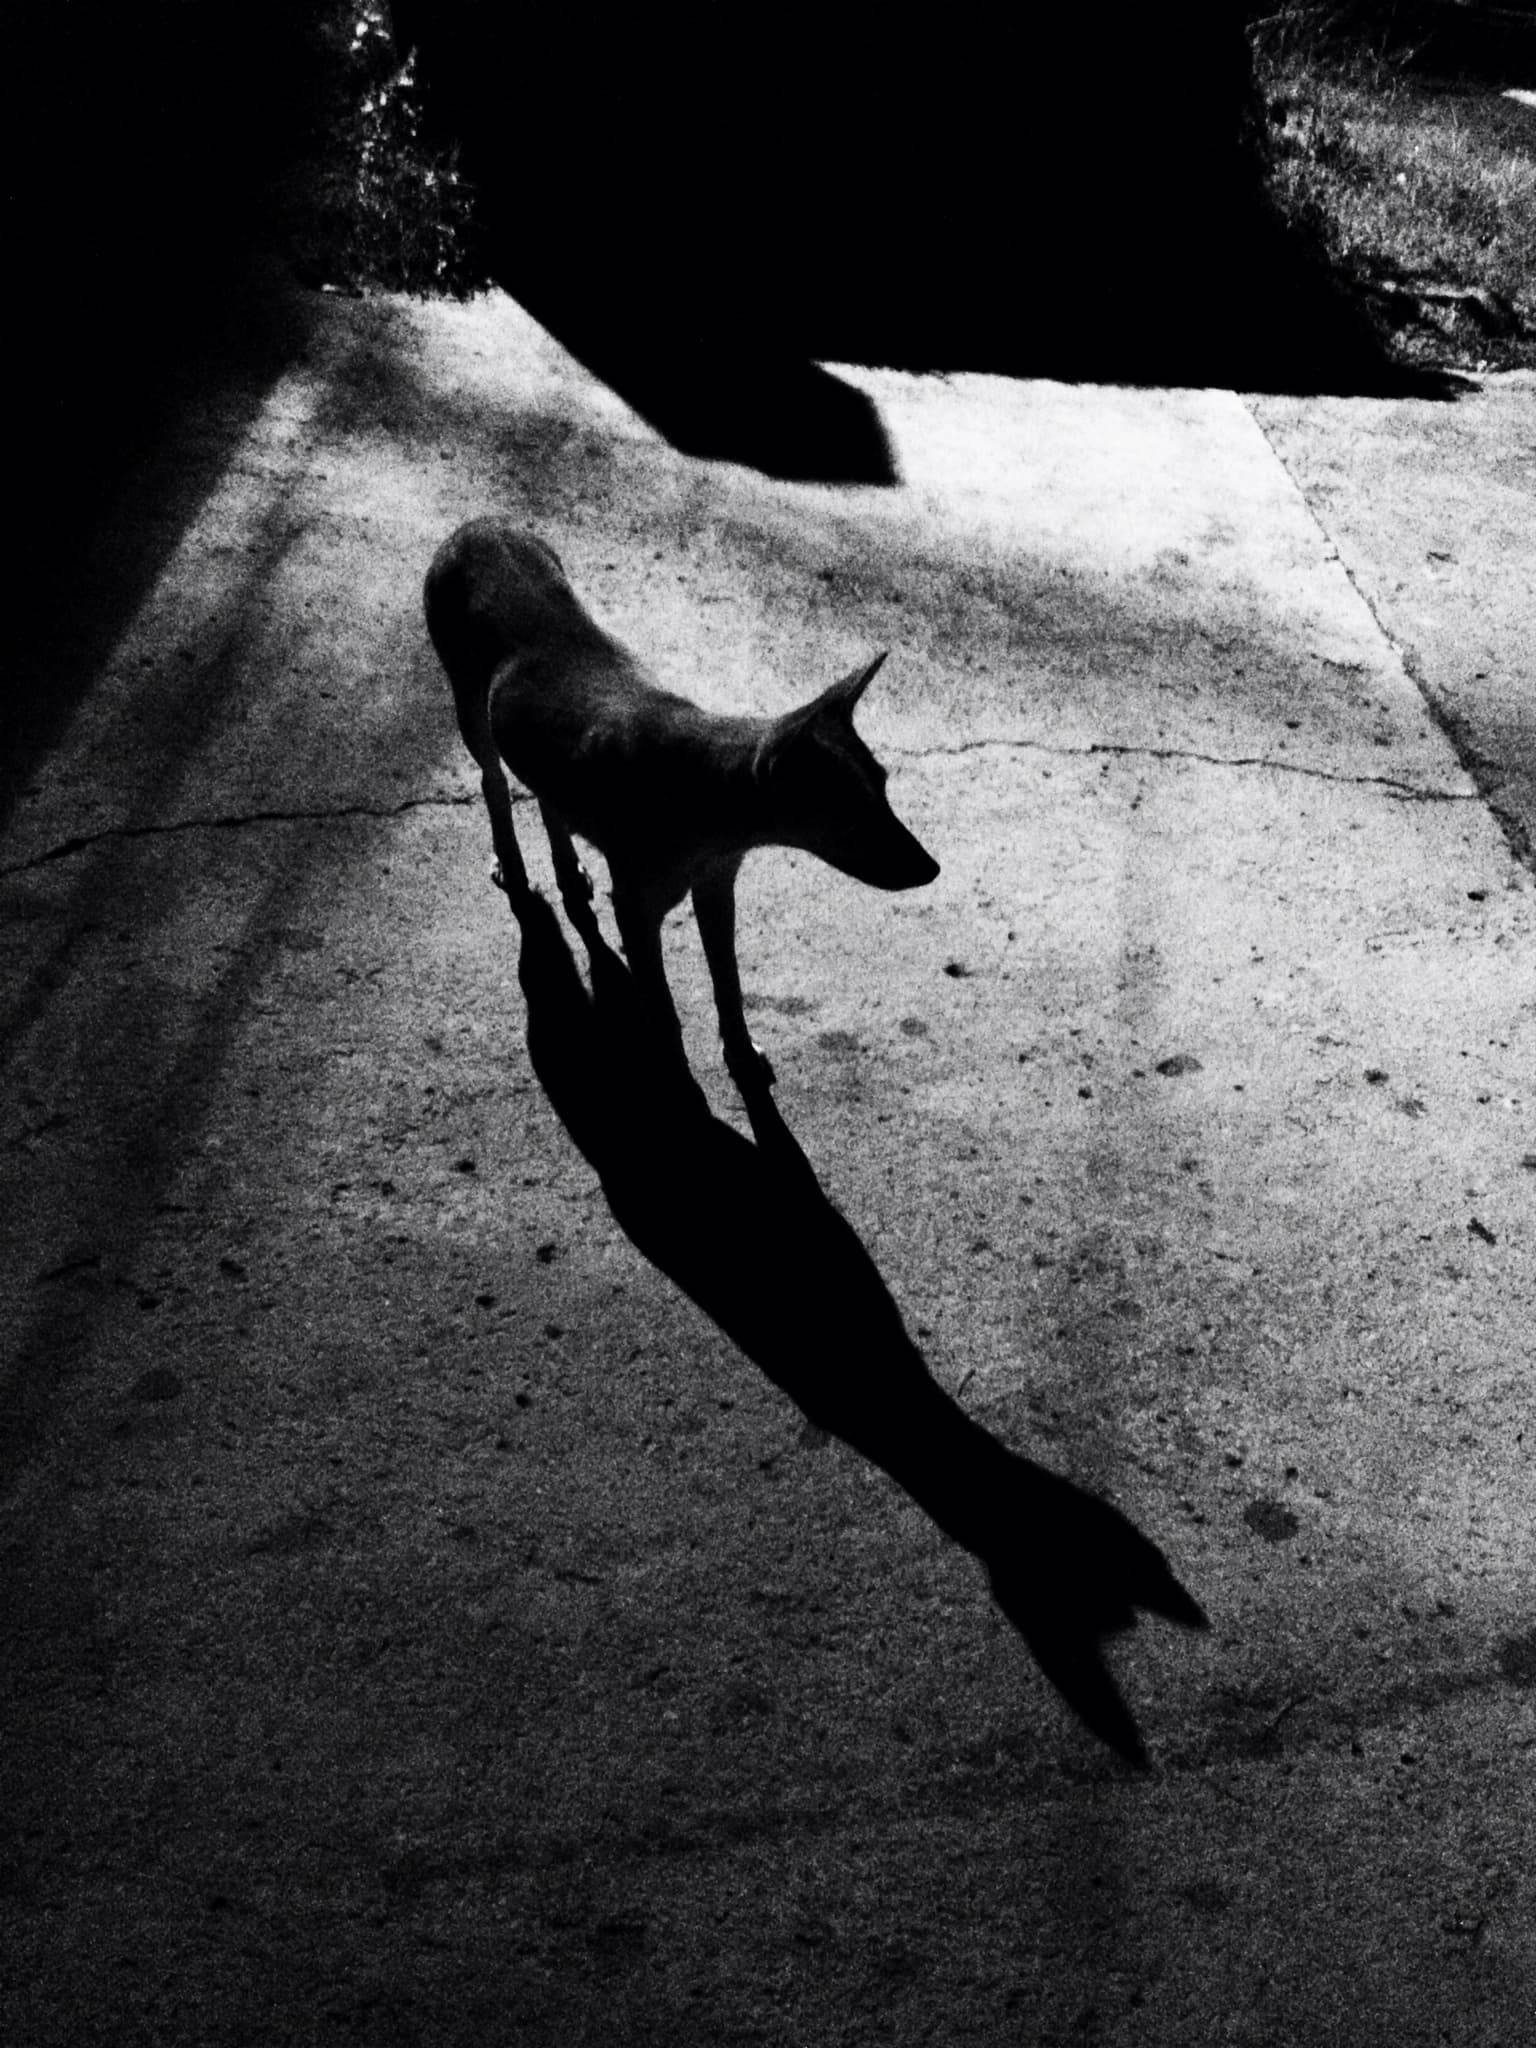 Dog in the night with a shadow.